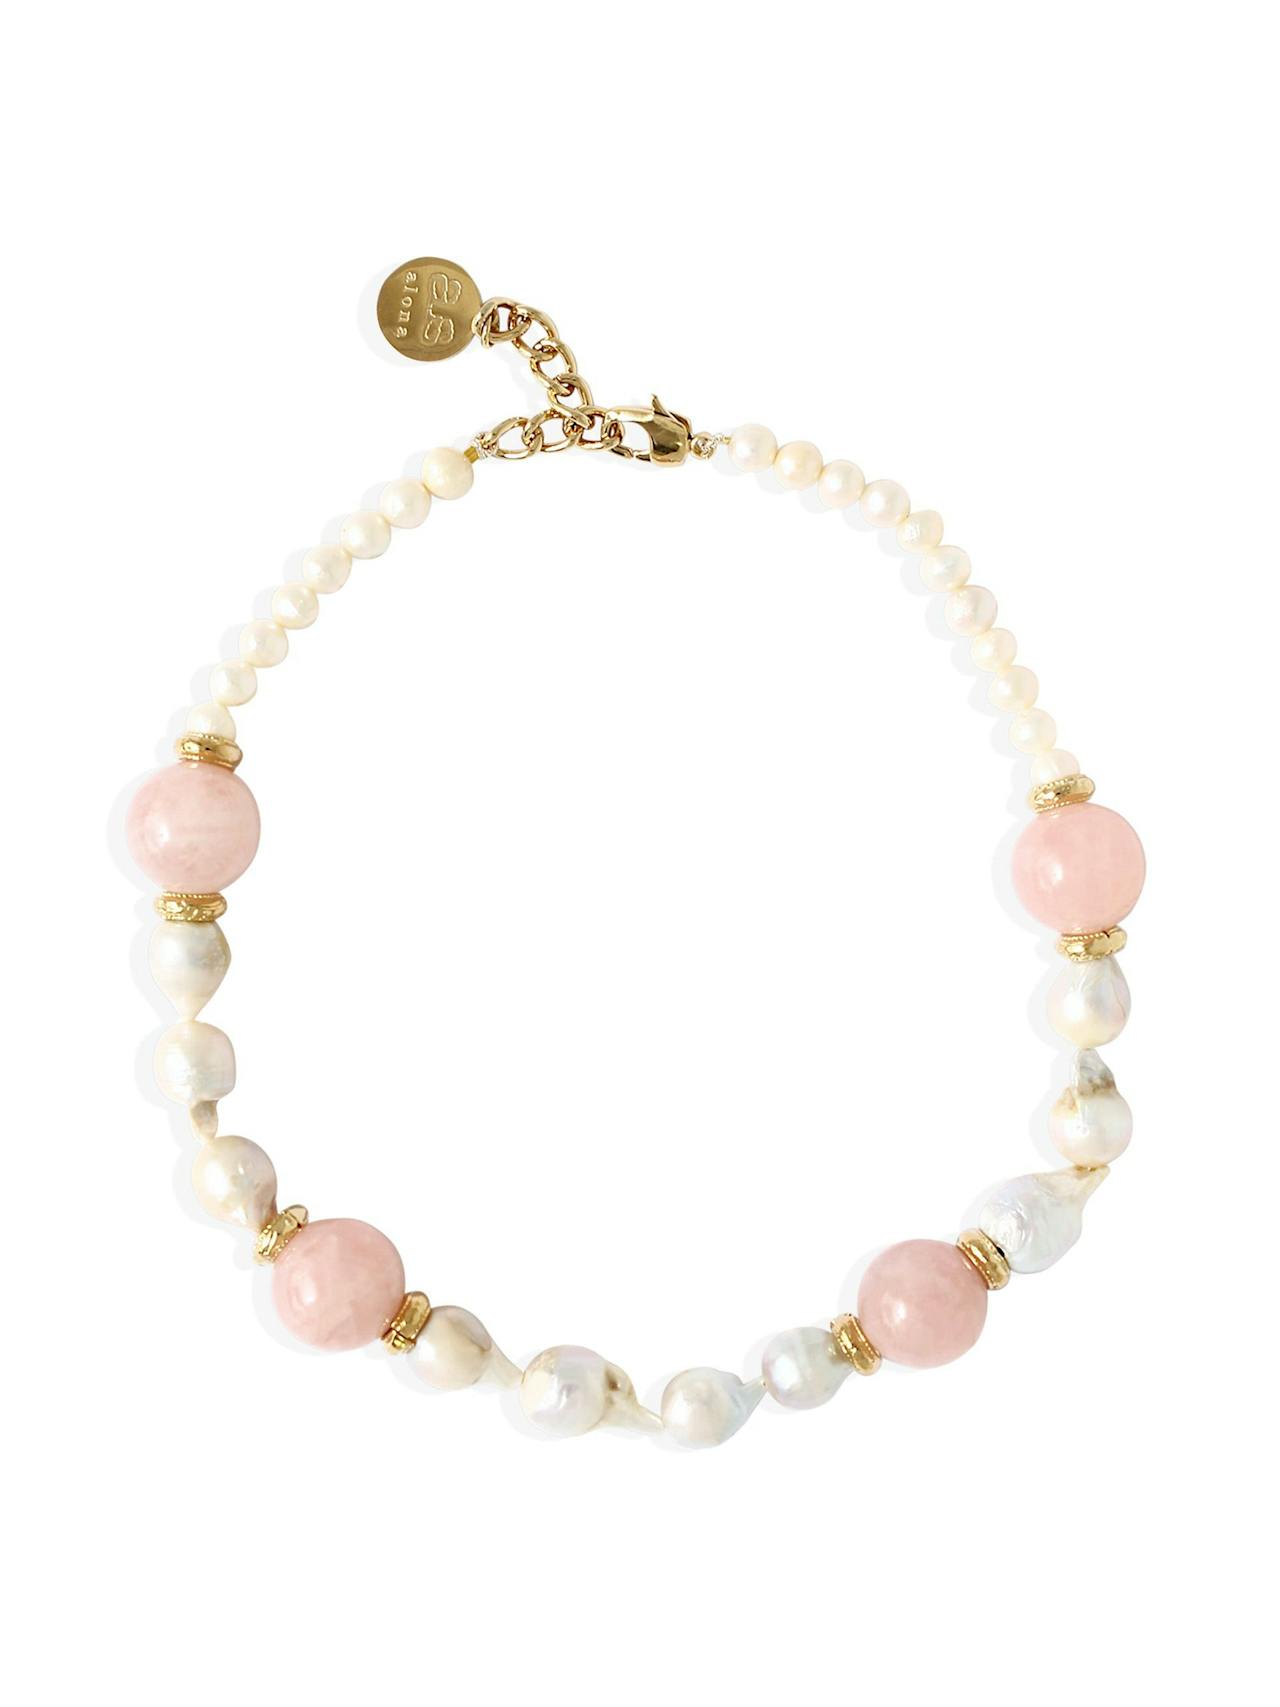 Rose quartz with pearls Laylani necklace